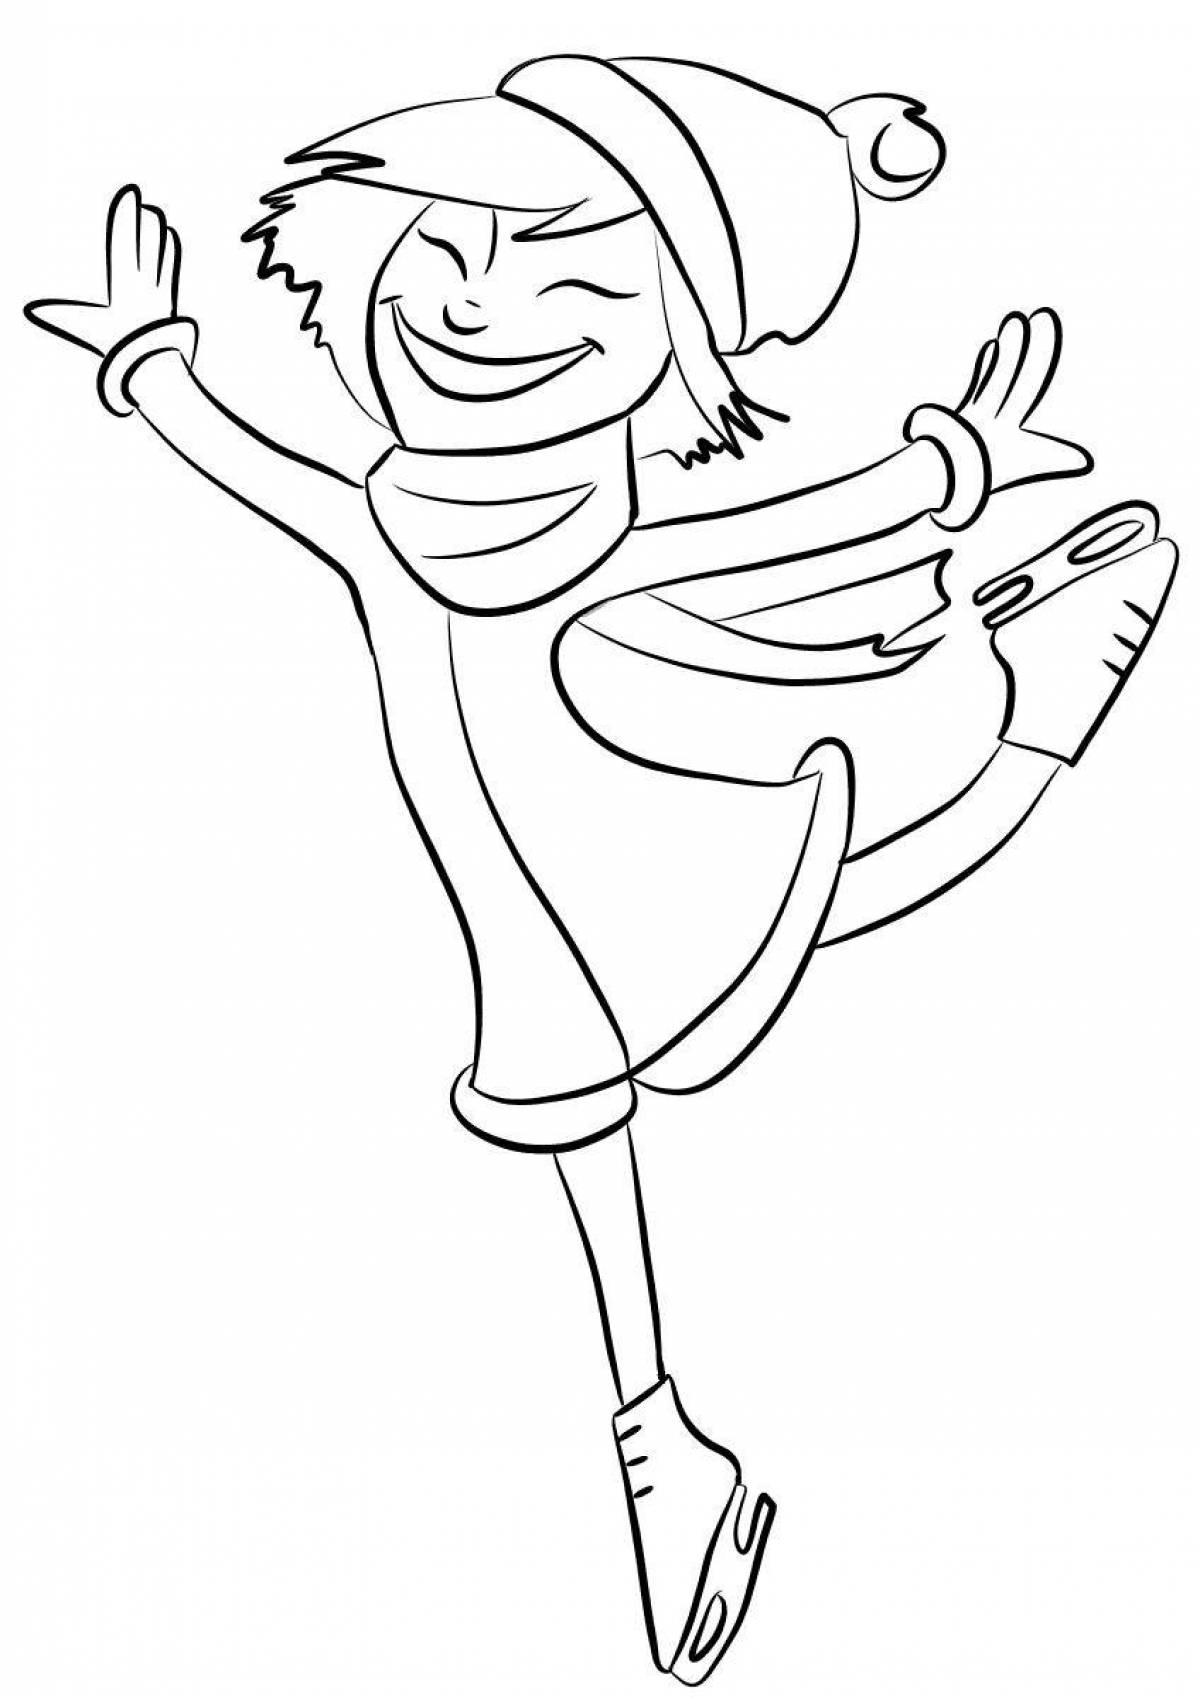 Playful skater coloring page for kids